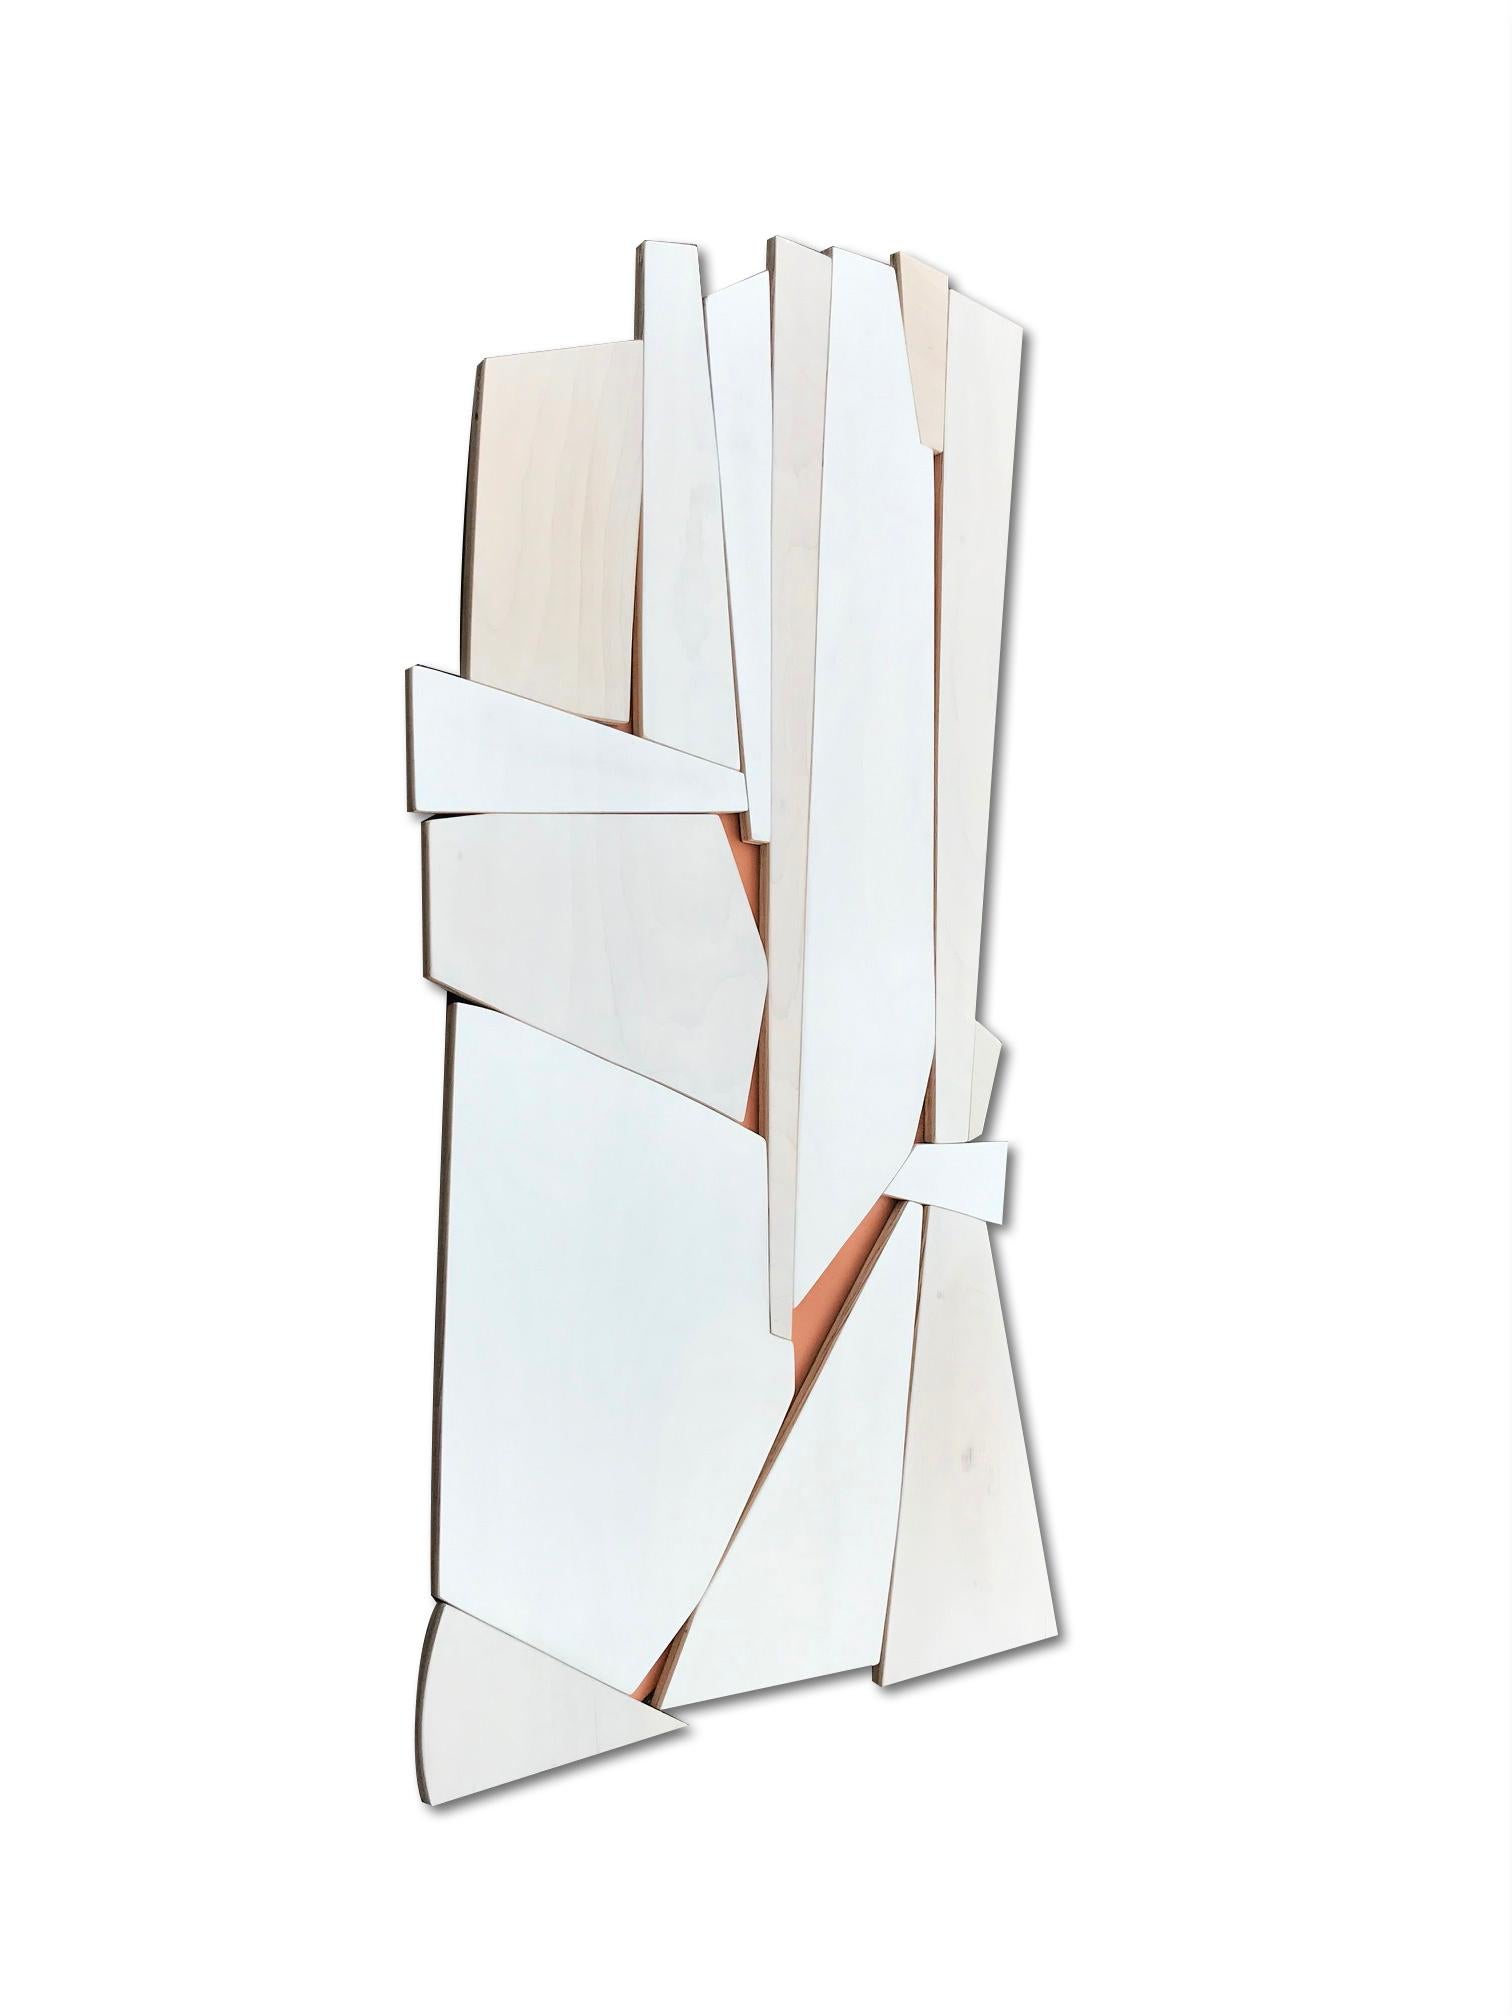 Cathedral 2 (wood modern monochrome wall sculpture minimal geometric design - Painting by Scott Troxel